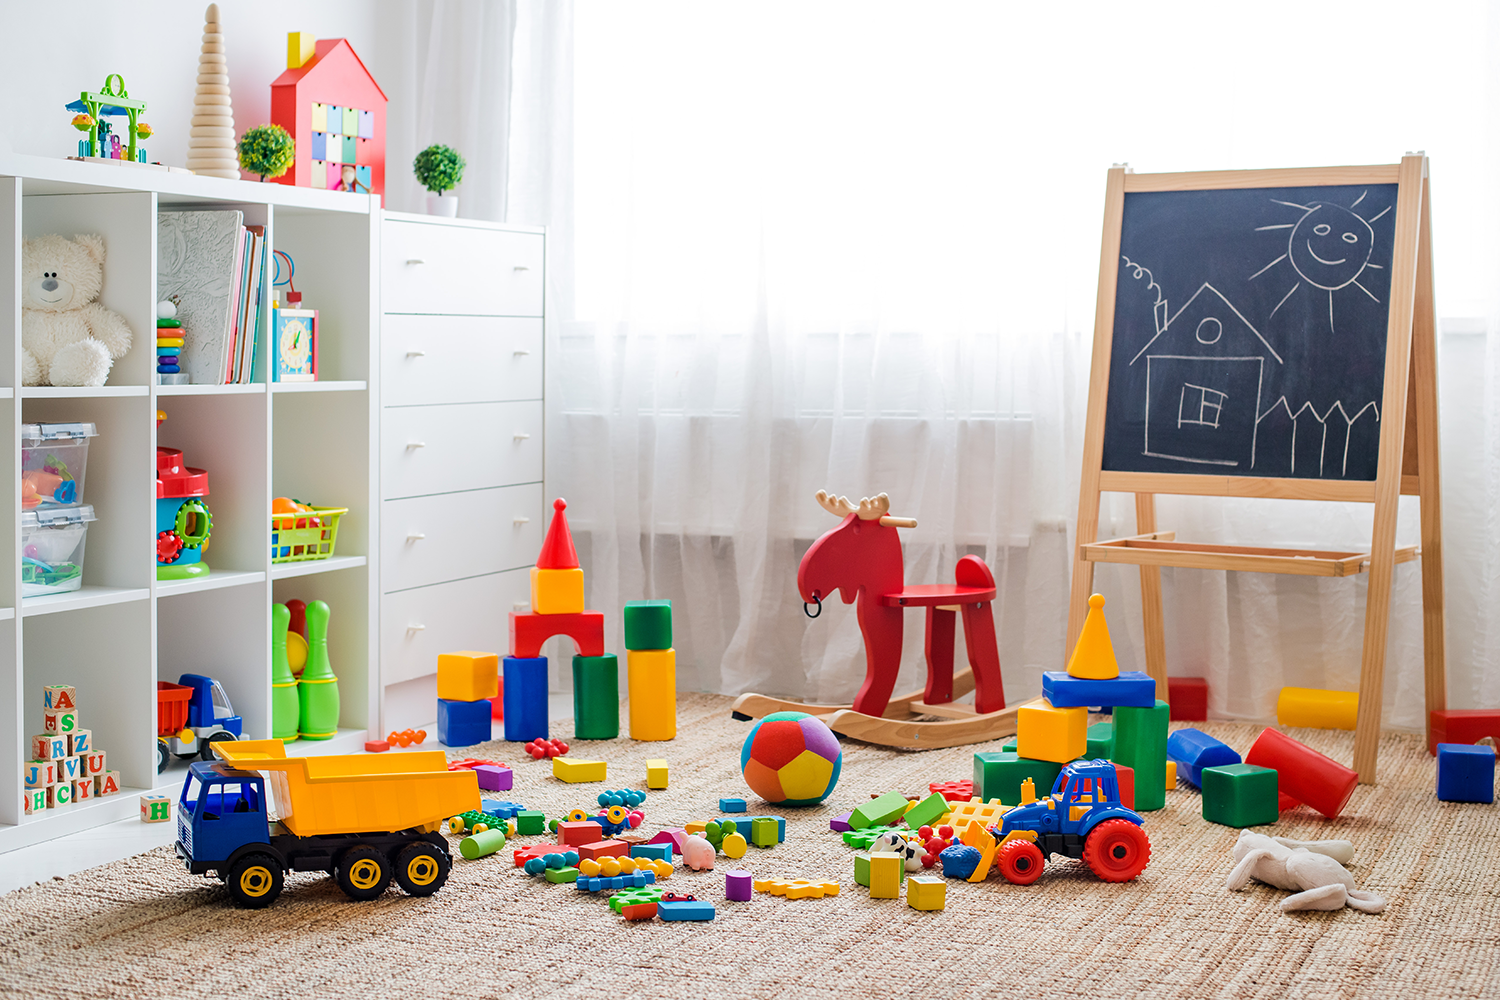 Playroom with cube storage, chalkboard easel and toys on the floor